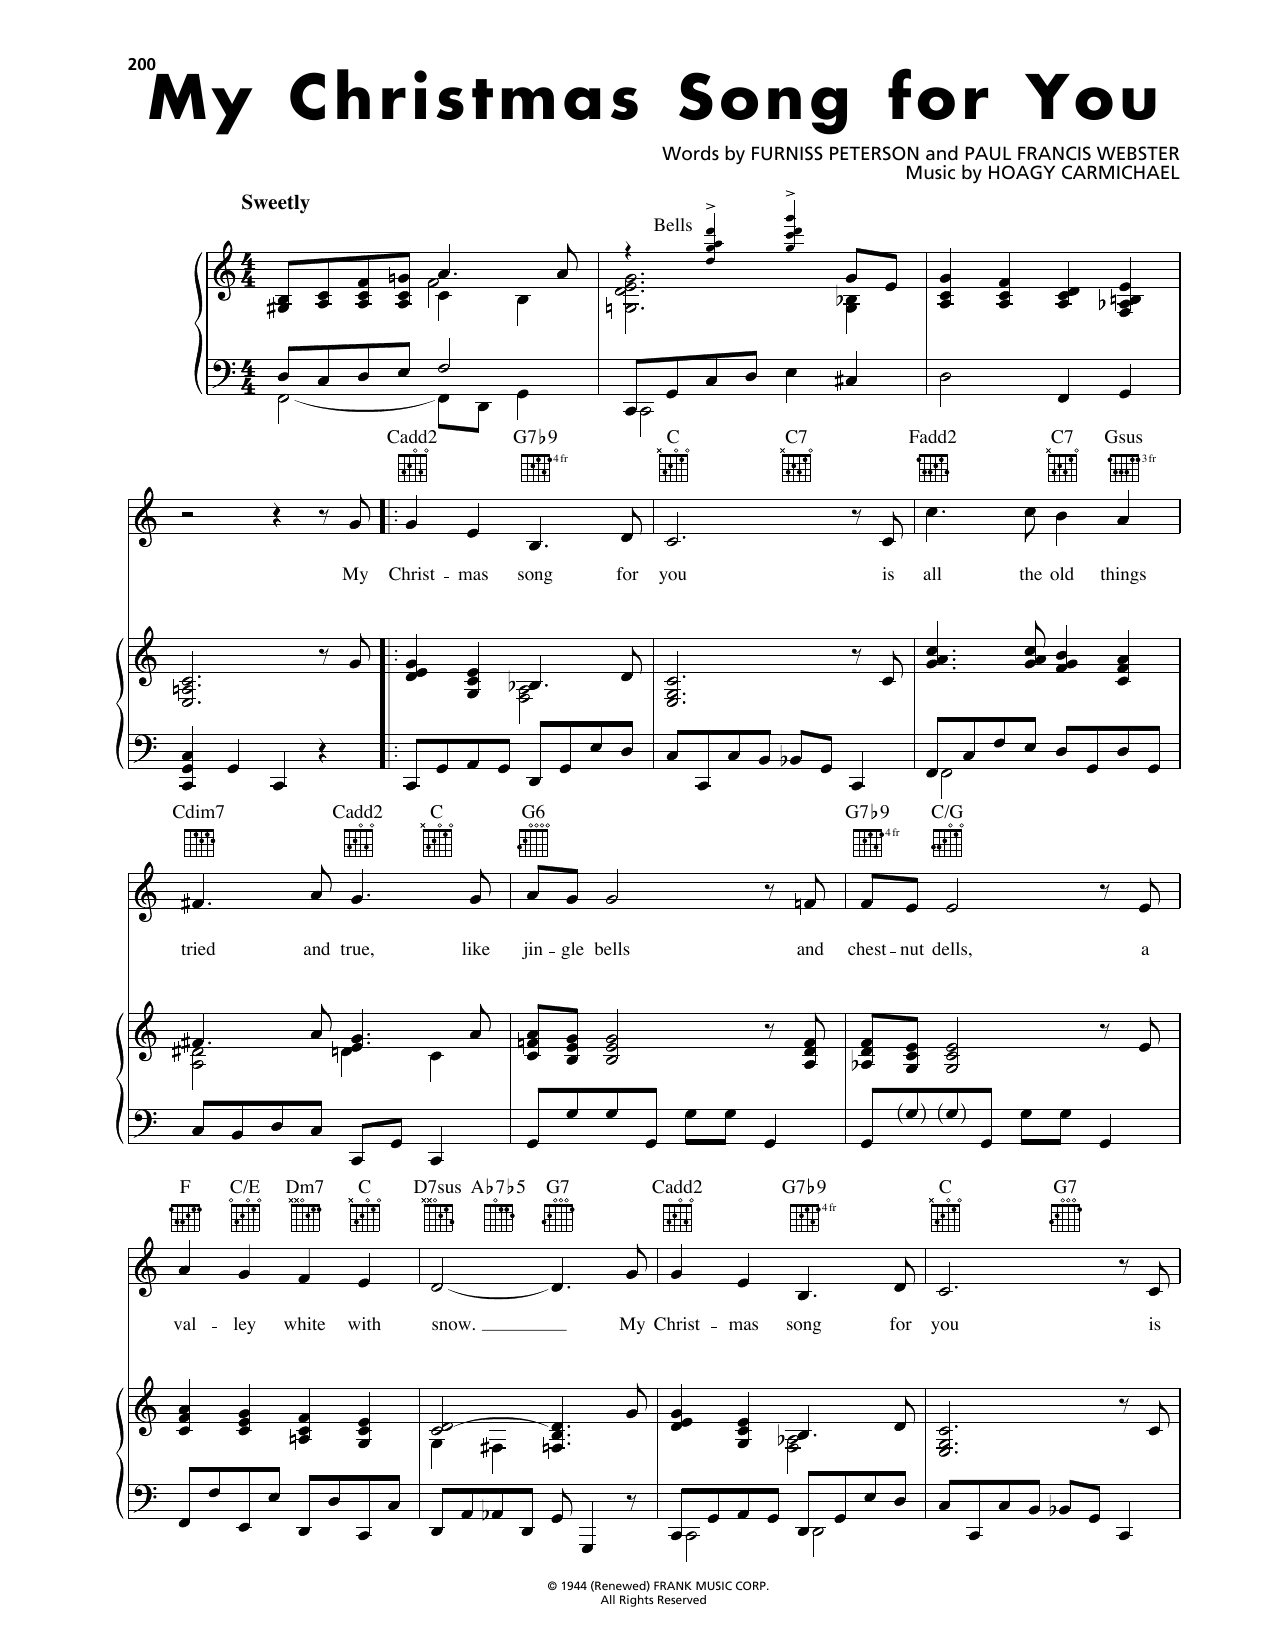 Download Hoagy Carmichael My Christmas Song For You Sheet Music